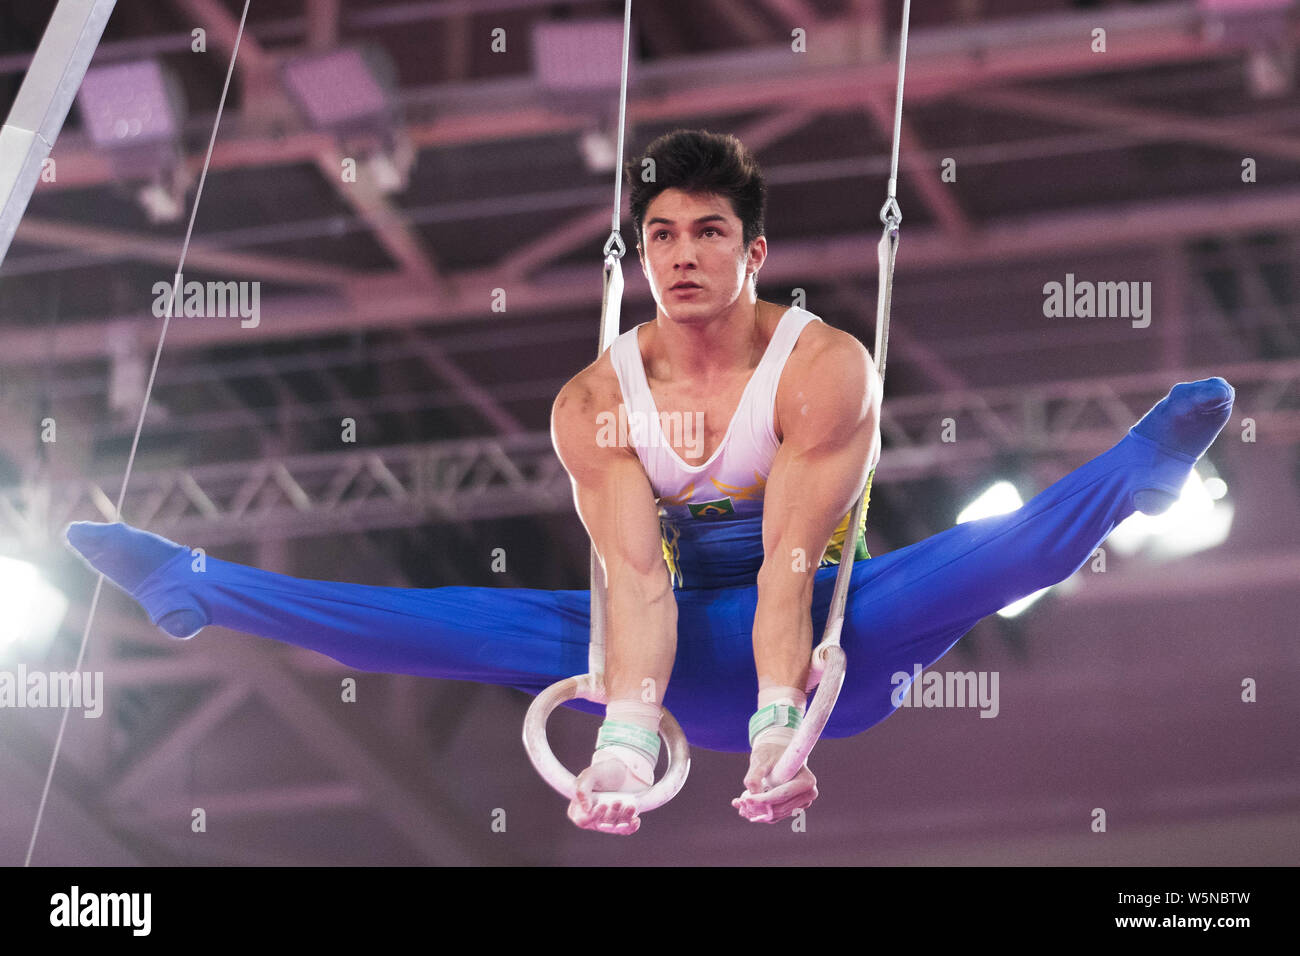 Lima, Peru. 28th July, 2019. Arthur Mariano (#78) of Brazil performs on the still rings during the Pan American Games Artistic Gymnastics, Men's Team Qualification and Final at Polideportivo Villa el Salvador in Lima, Peru. Daniel Lea/CSM/Alamy Live News Stock Photo